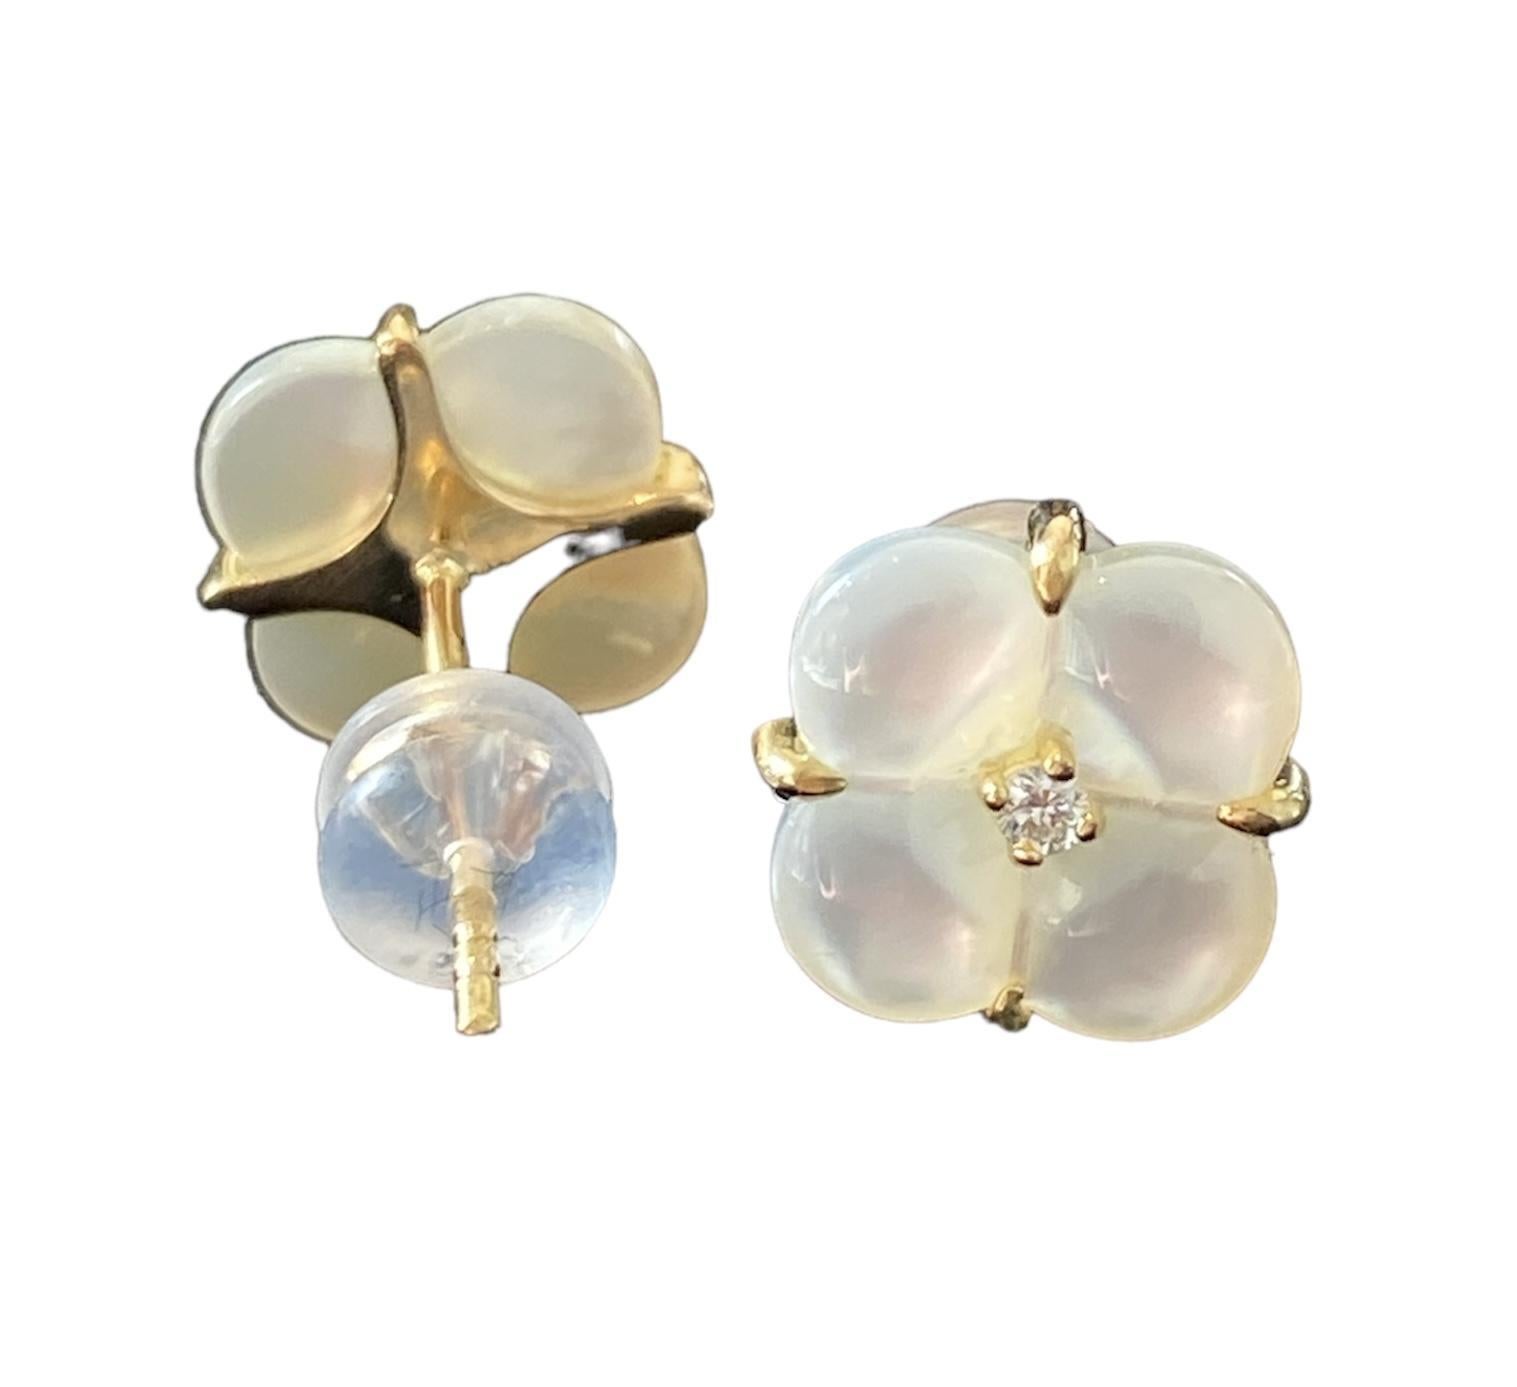 The 18K yellow gold mother of pearl clover diamond earring is a captivating and elegant accessory that effortlessly combines classic design with a modern flair.
Crafted from solid 18-karat yellow gold, the earring features a delicate clover motif